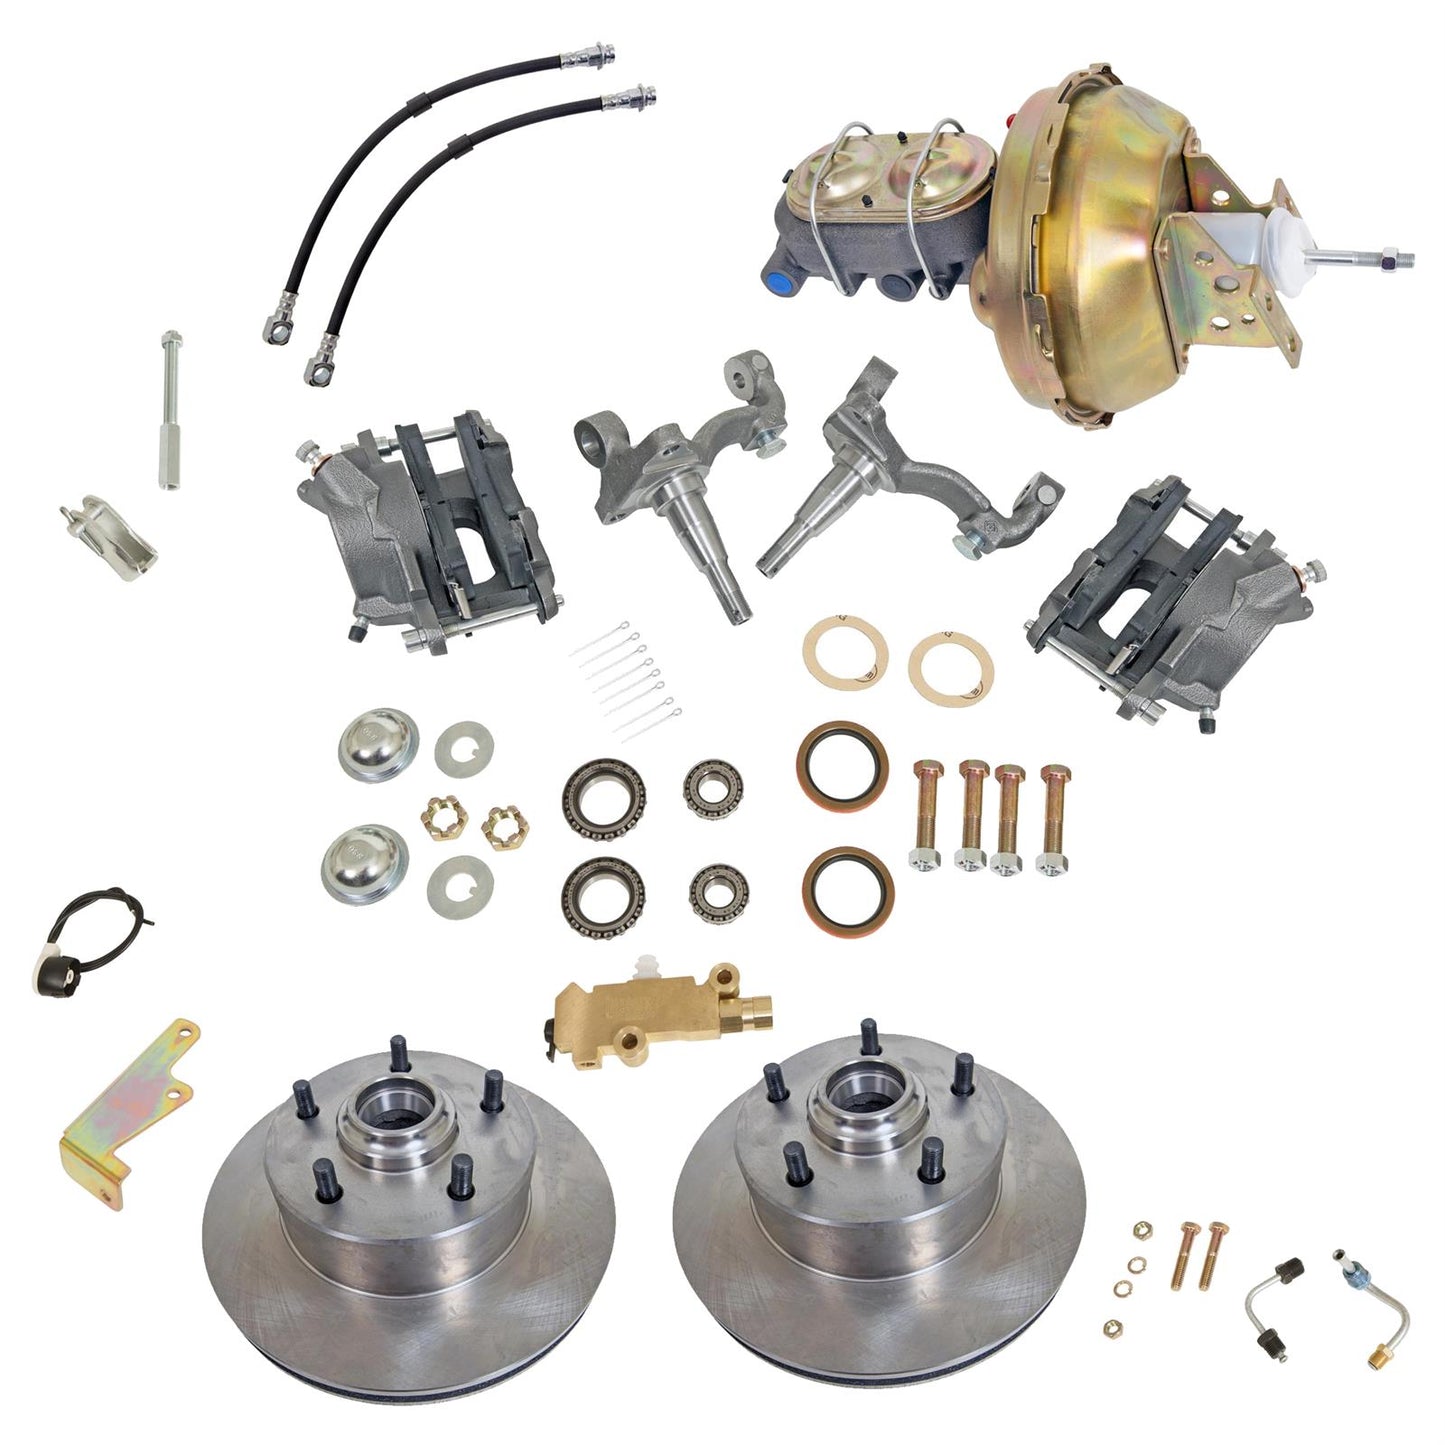 Summit Racing Complete Drum-to-Disc Brake conversion Kits SUM-BK1501 for 1964-1974 Buick, Chevrolet, Oldsmobile, Pontiac